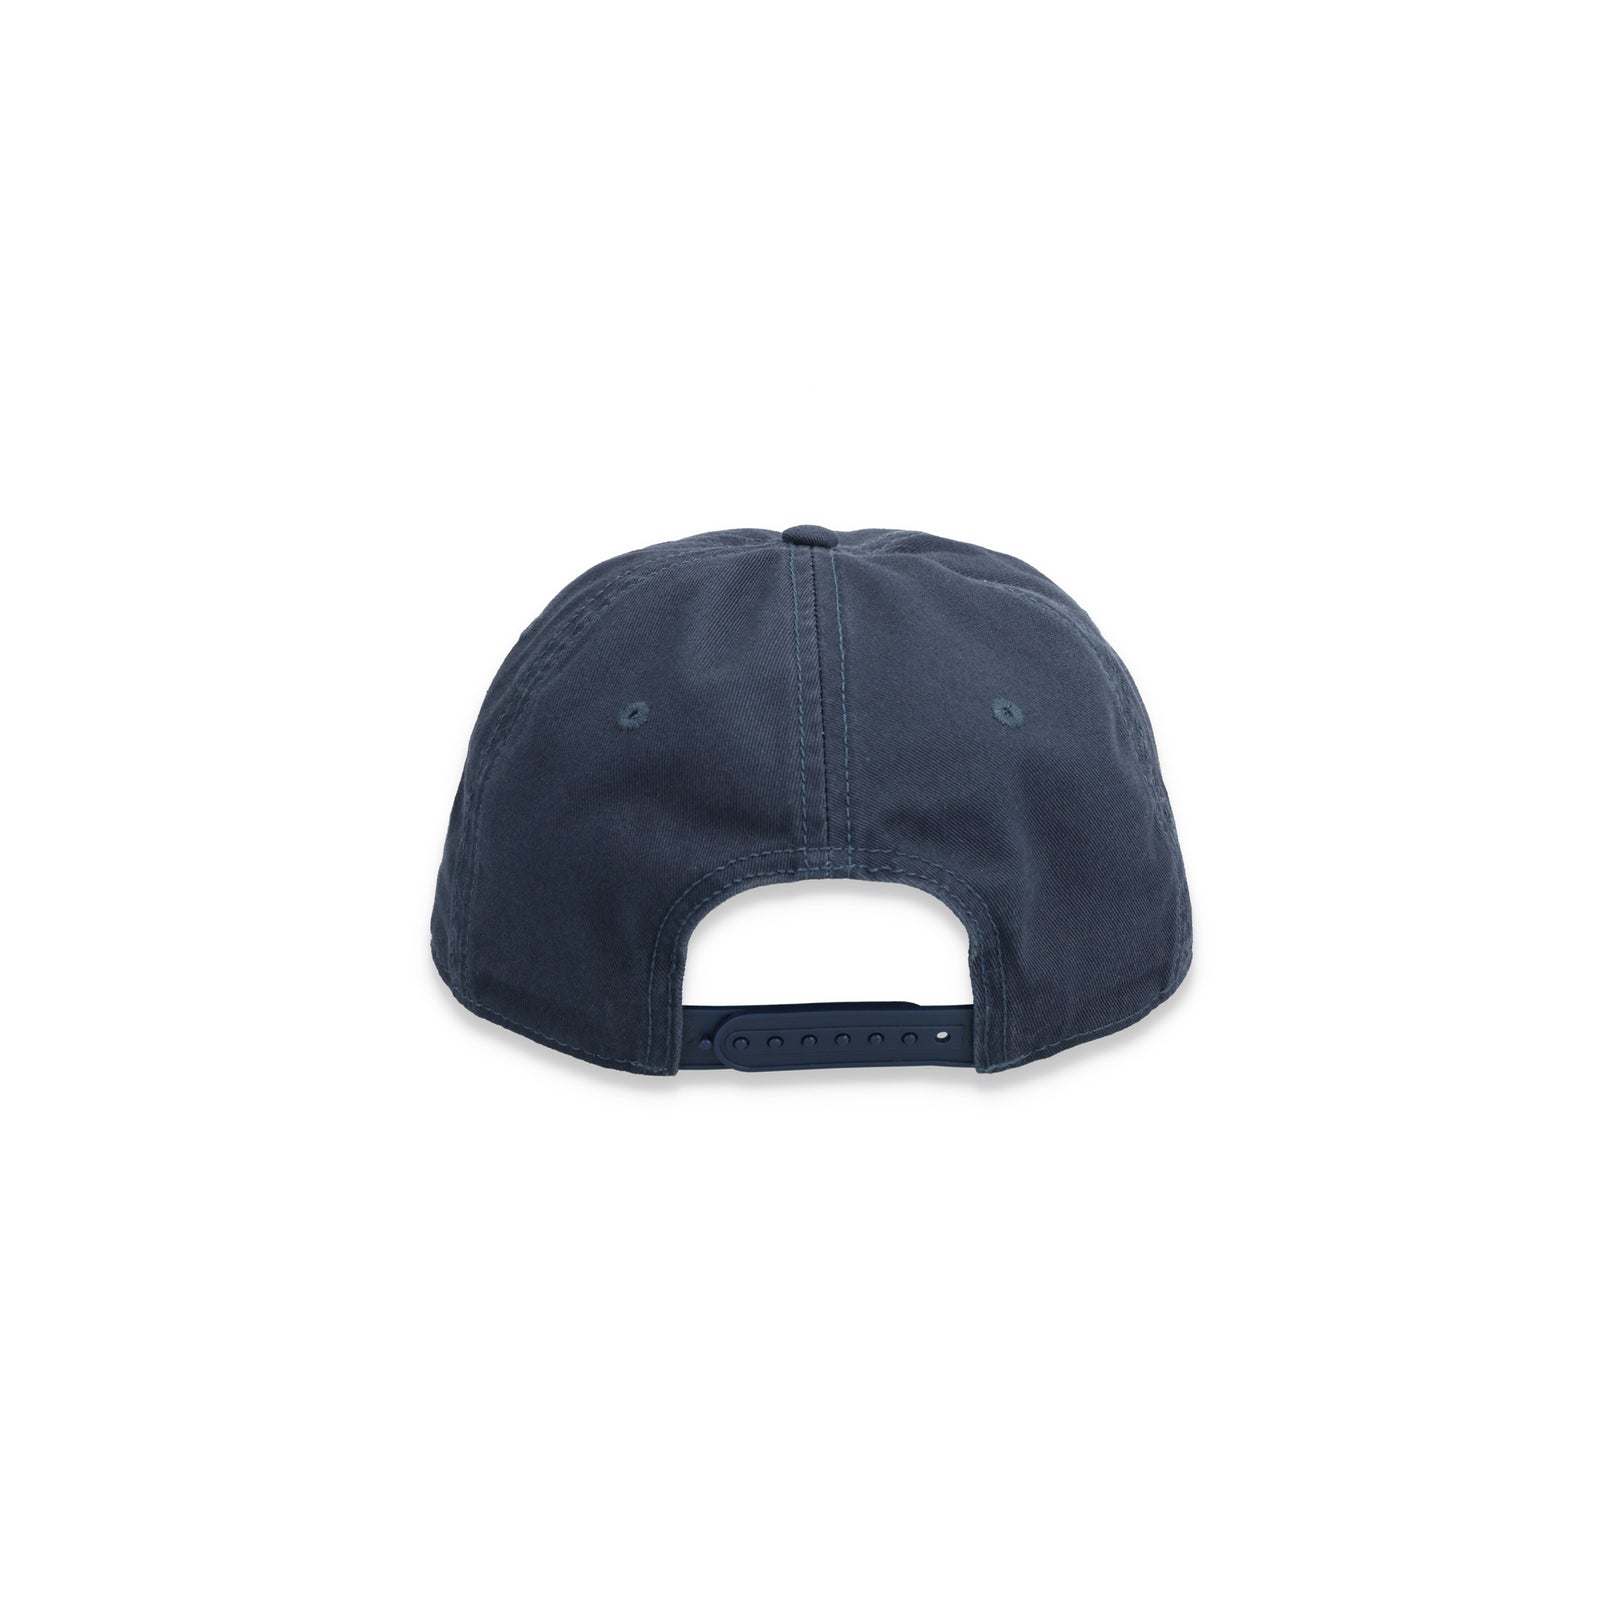 Back of Topo Designs 5 Panel Snapback Hat, embroidered logo baseball cap in "Navy" blue.